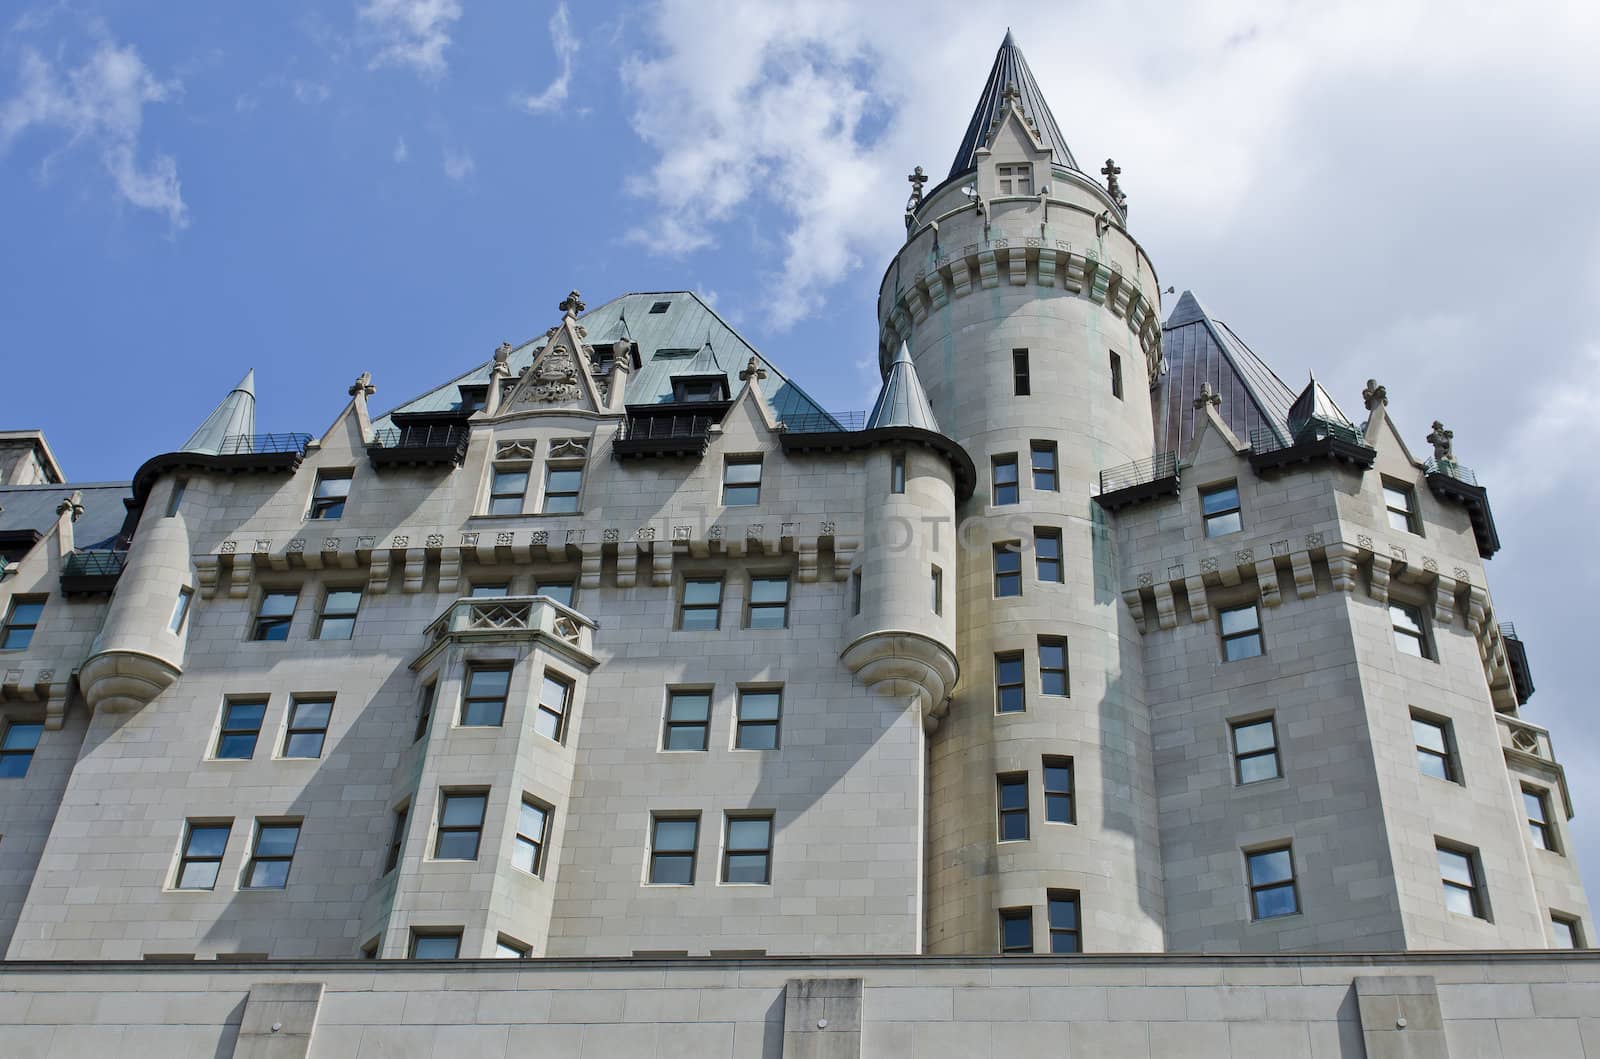 A side view of the Fairmont Chateau Laurier Hotel in downtown Ottawa, Canada. A few minutes walk from Parliament Hill.